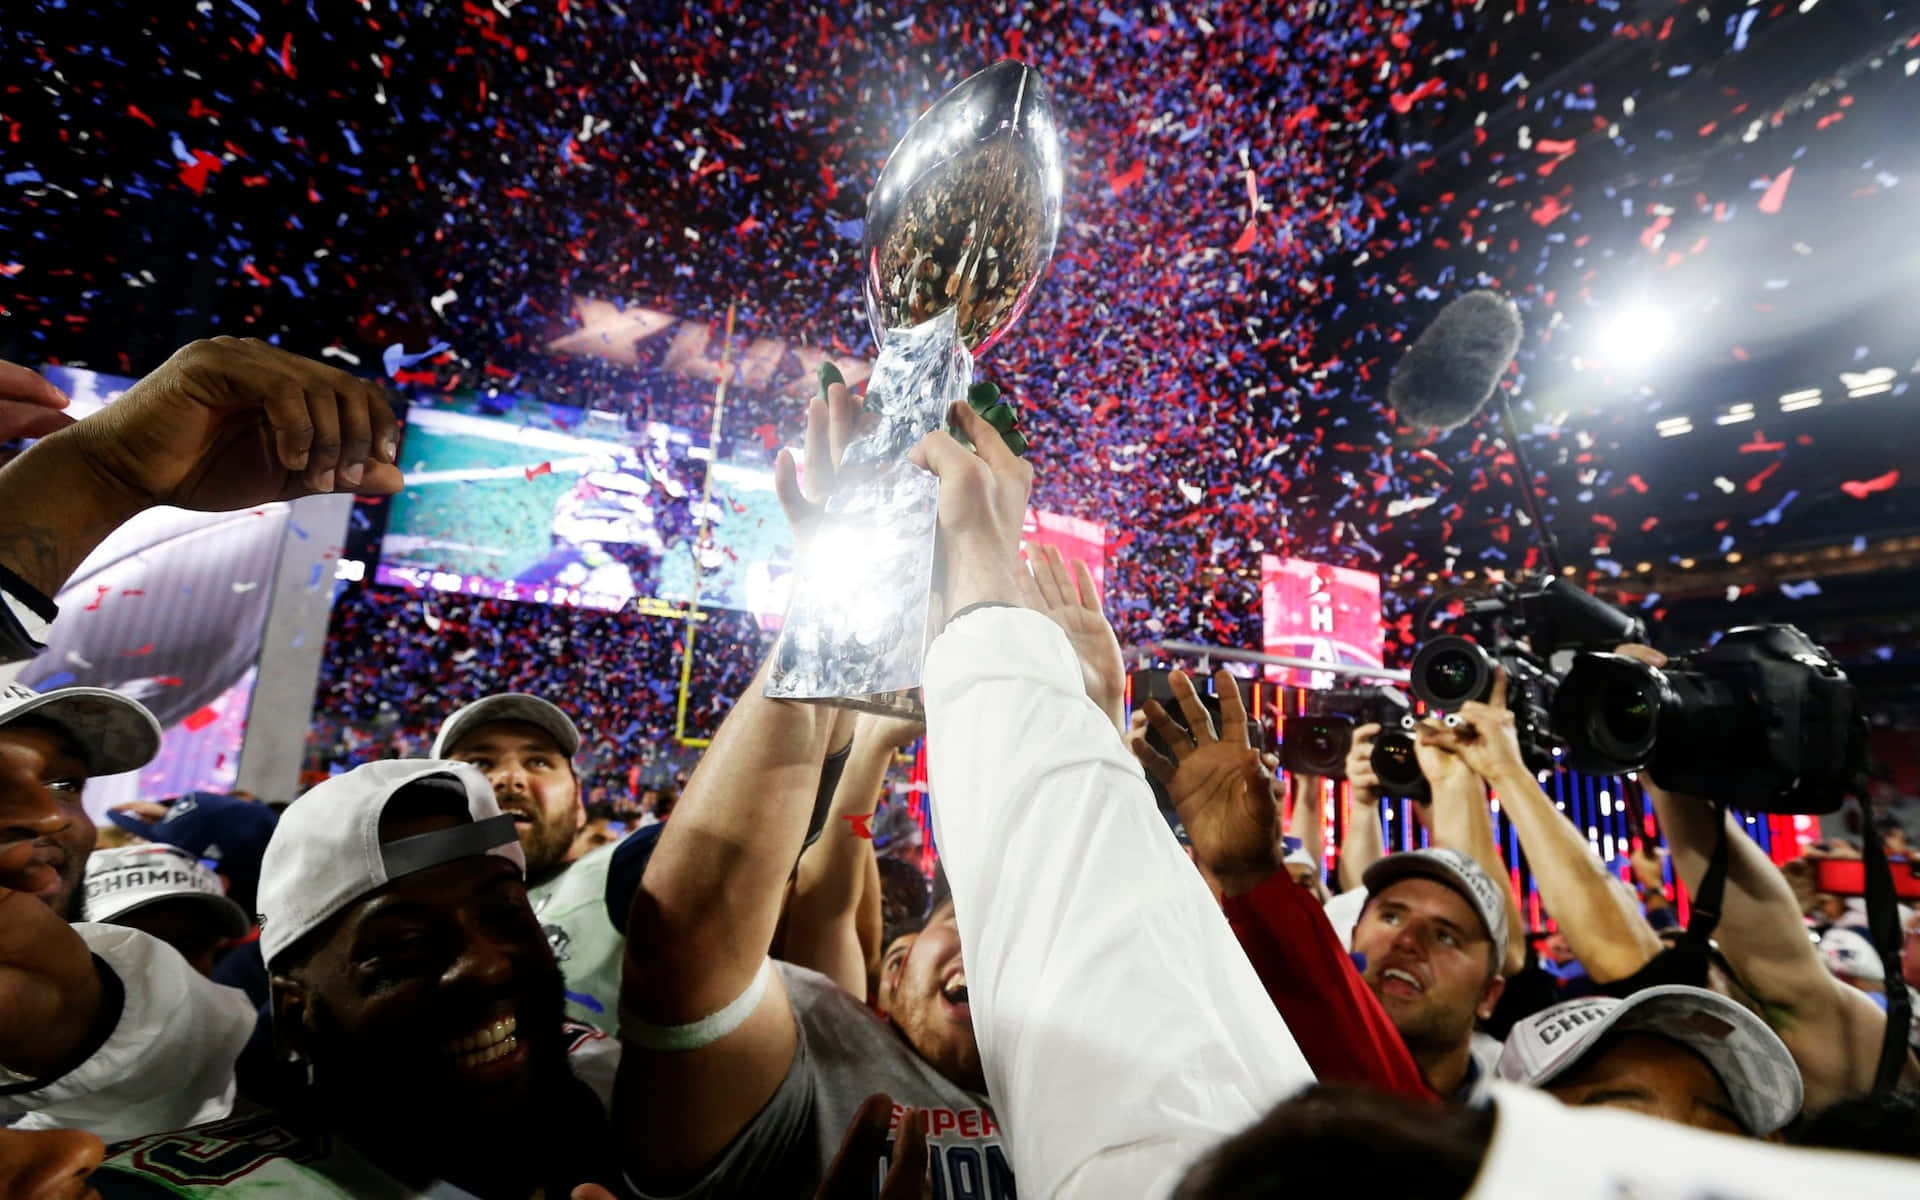 Celebration Moments of a Super Bowl Victory